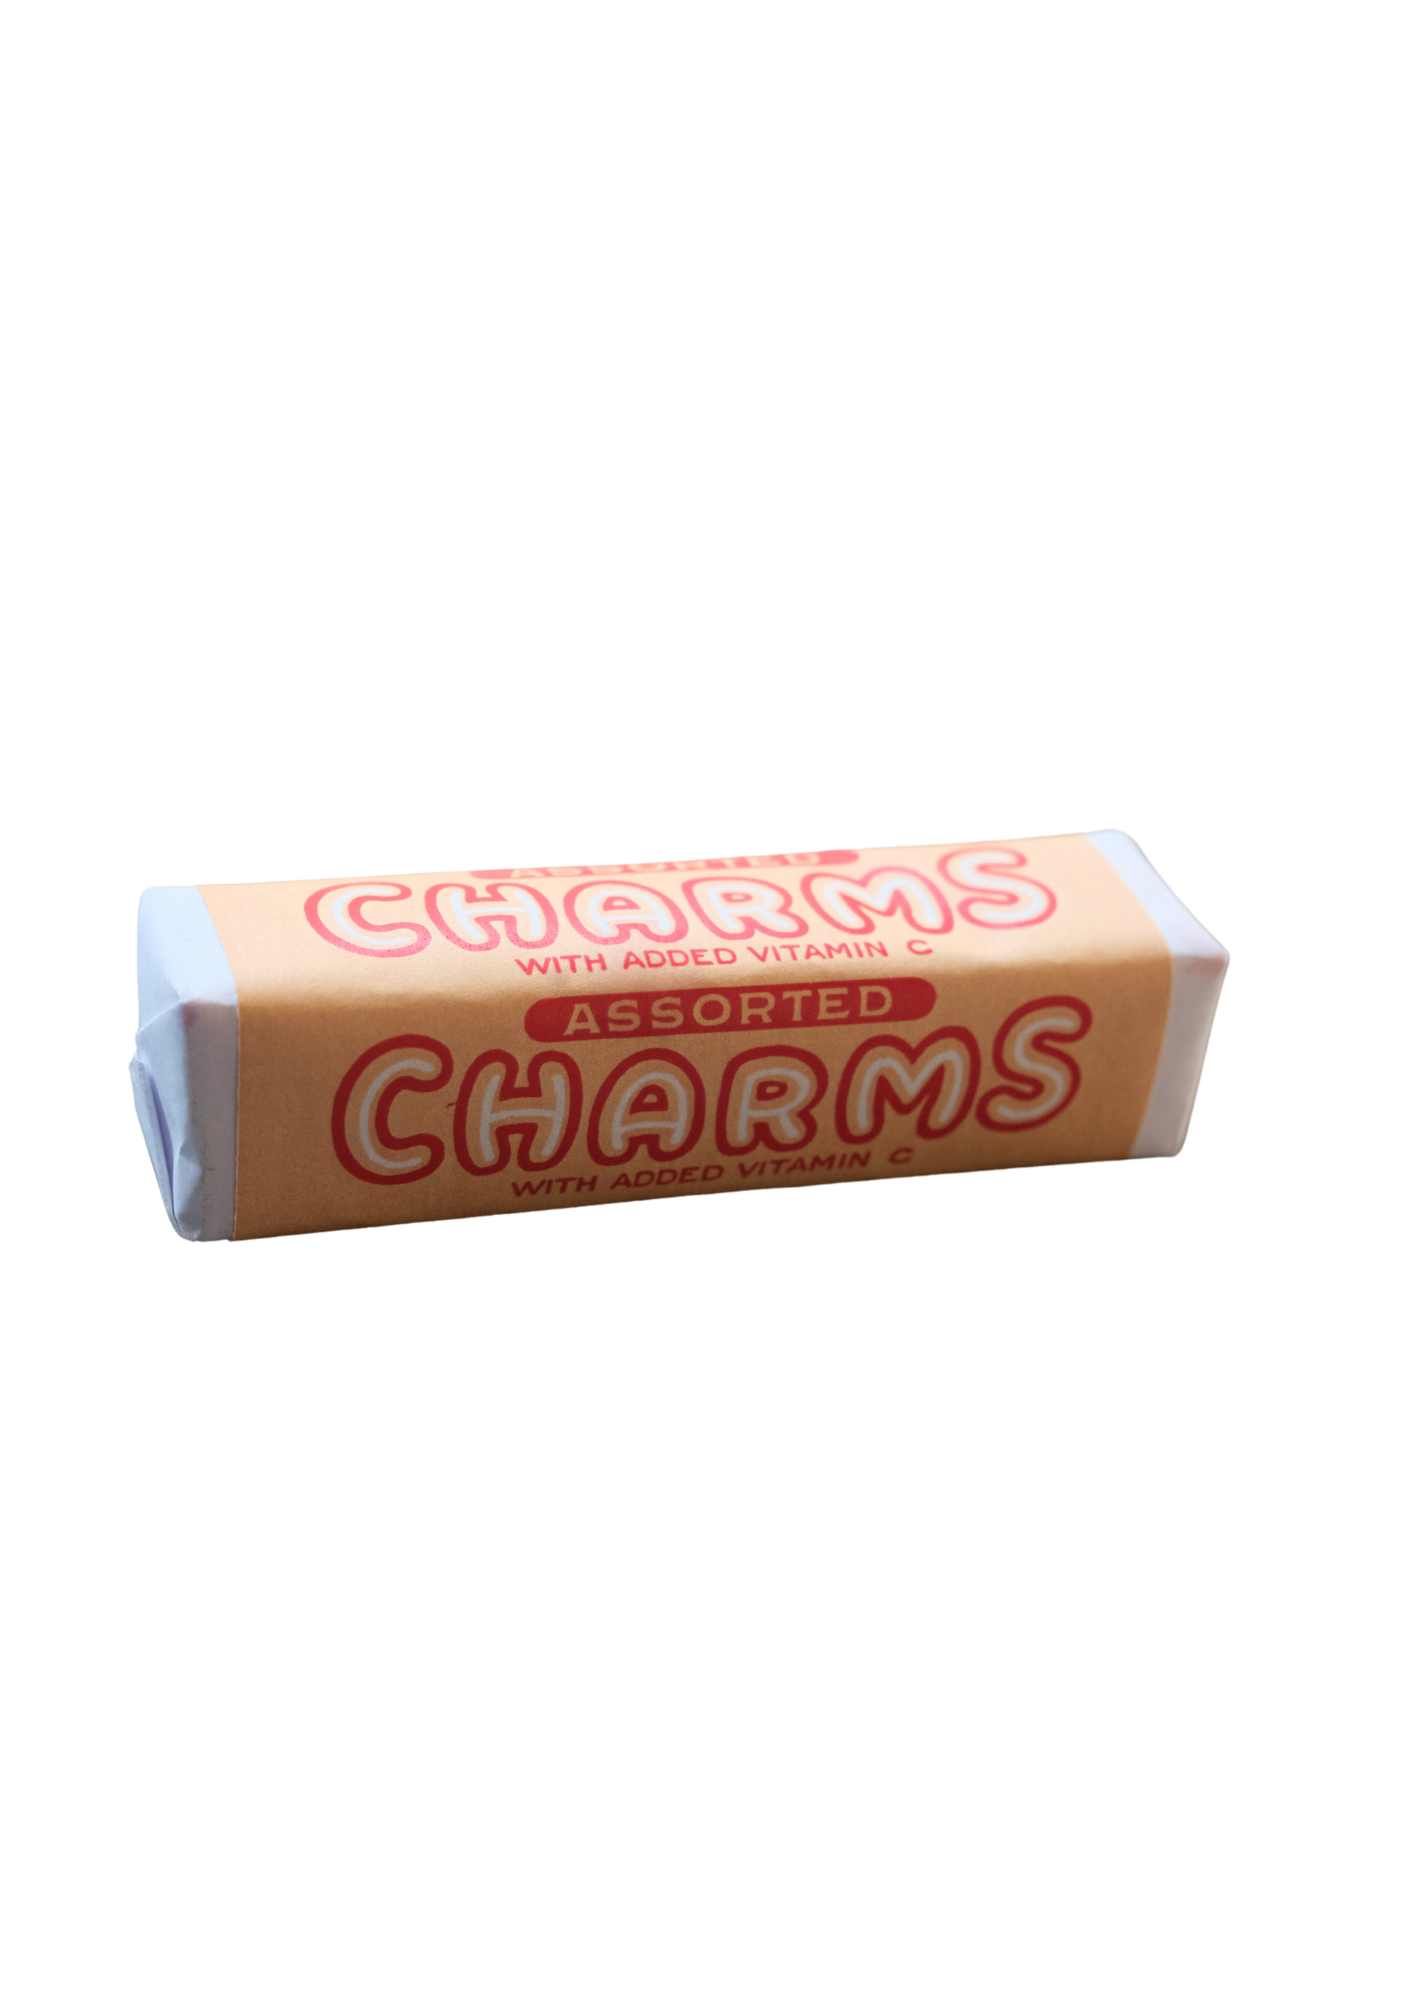 Charms Assorted with added Vitamin C